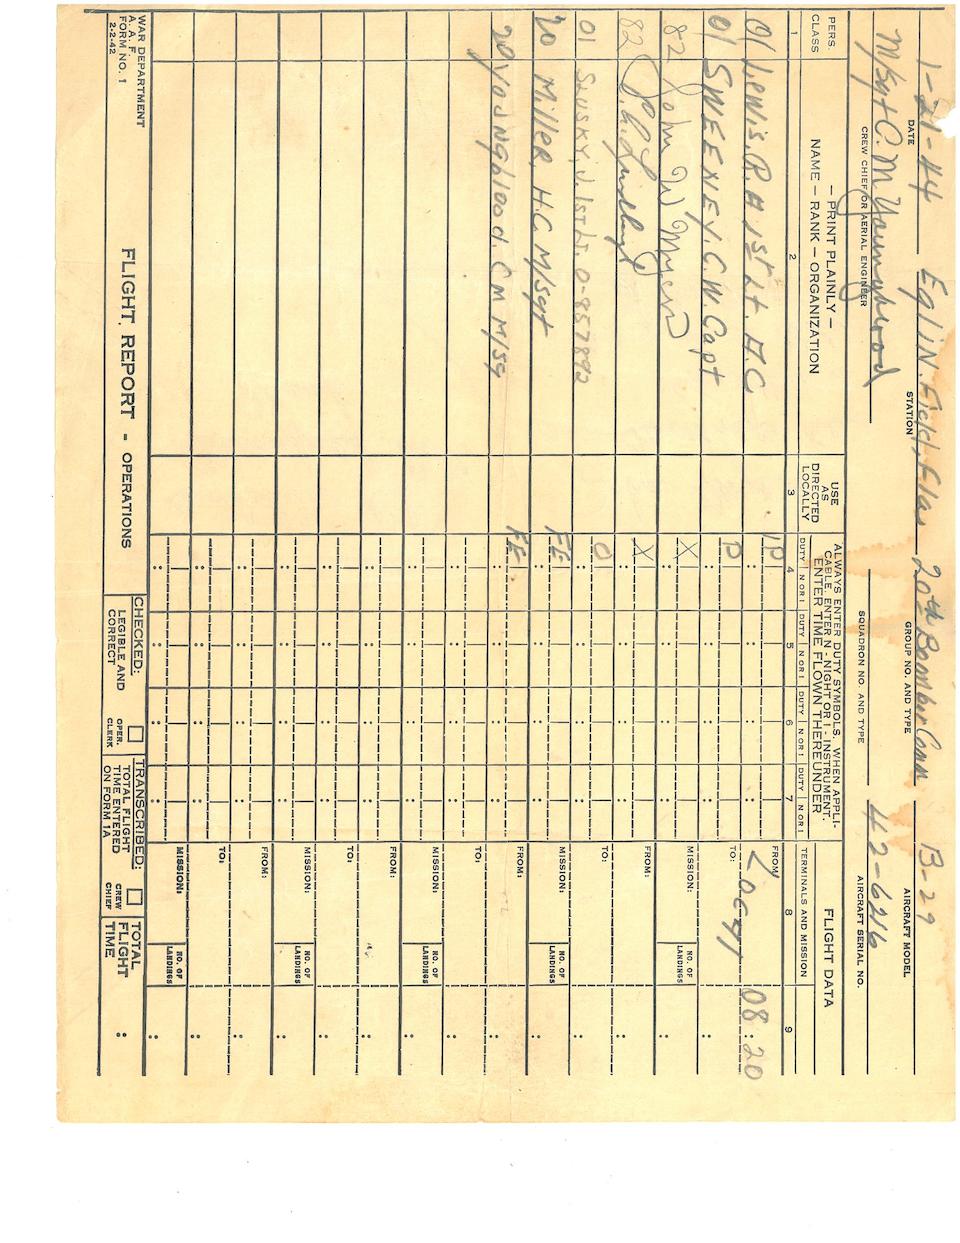 Official Flight Log and 201 File of Captain Robert A. Lewis, co-pilot of the Enola Gay 11.5 x 9.5 in 3